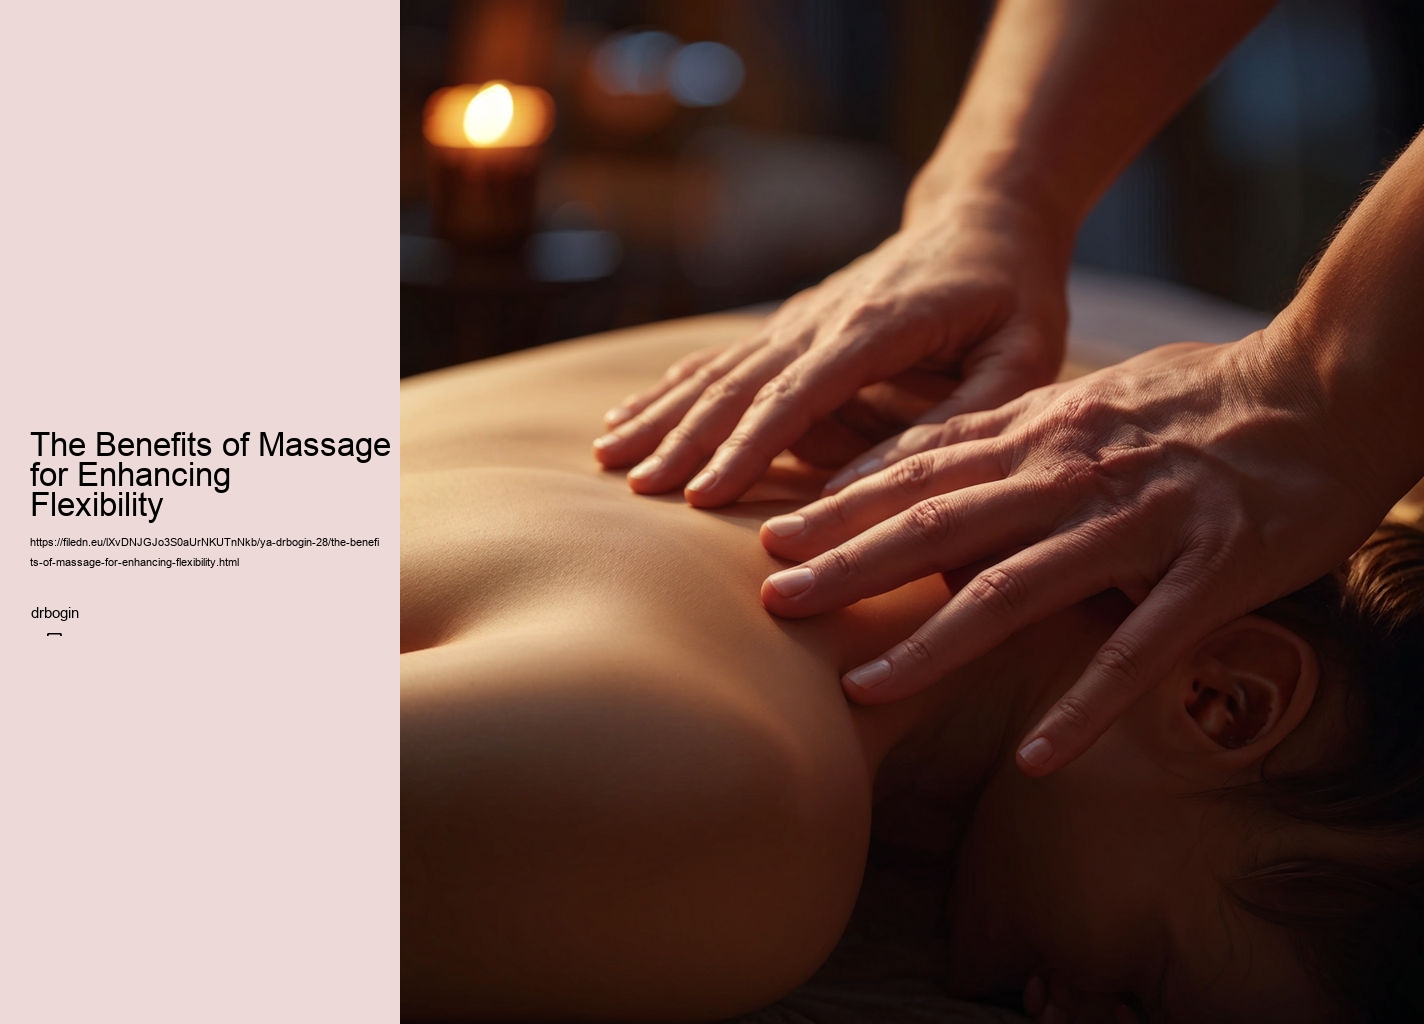 The Benefits of Massage for Enhancing Flexibility